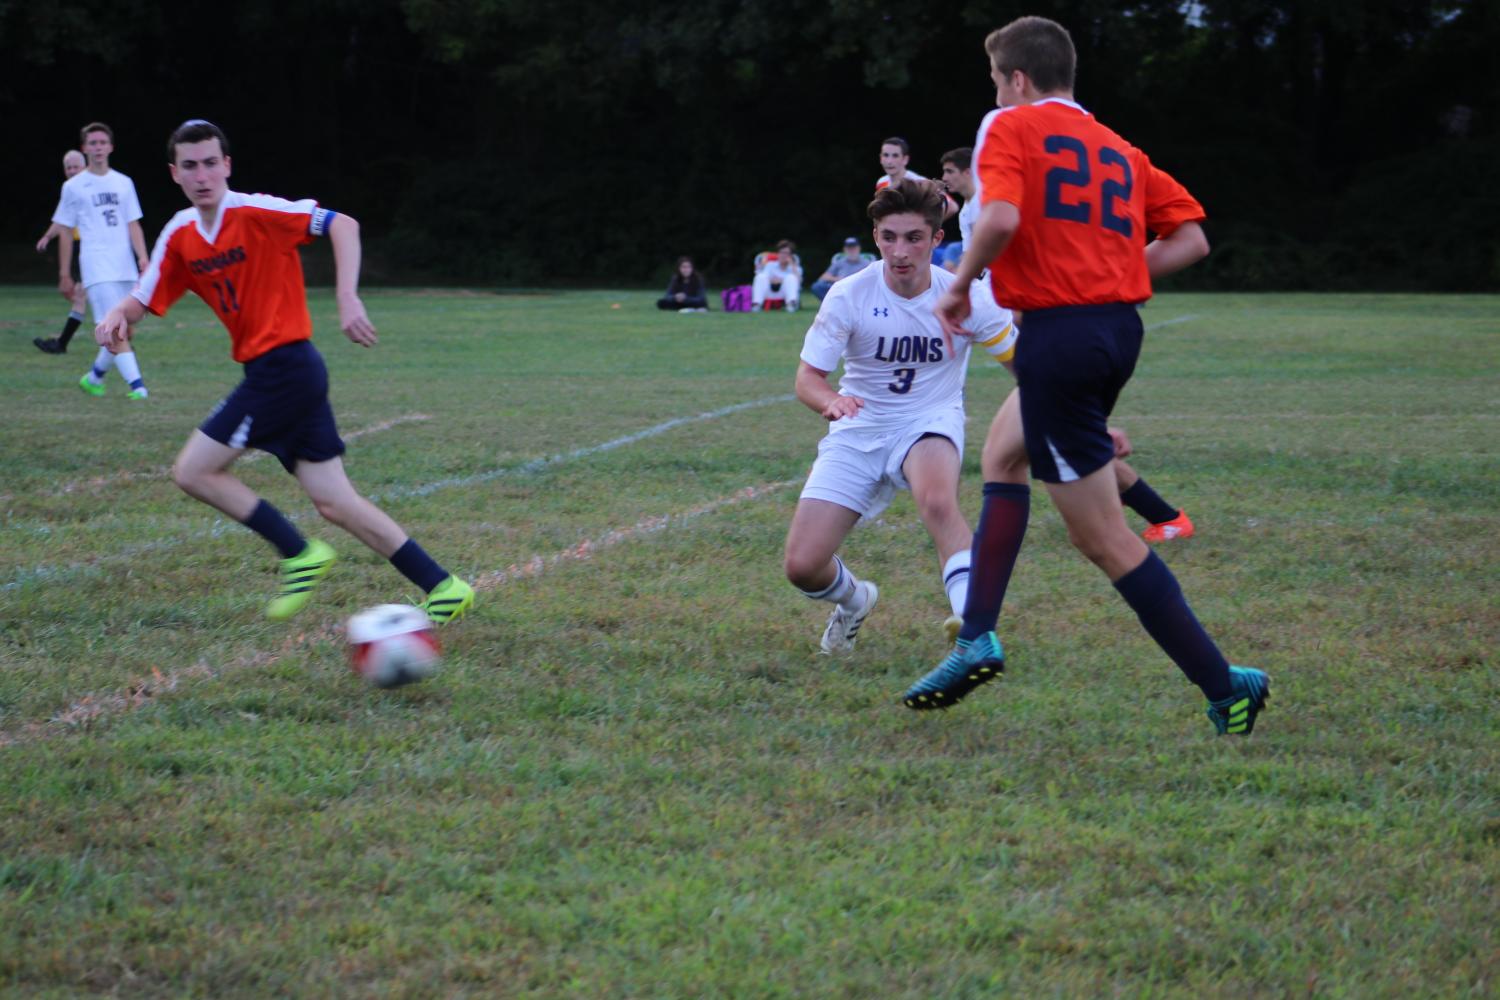 Senior Mattie Swire hustles to the ball as two Berman players run the field.  The Lions lost to the Berman Cougars 6-0.